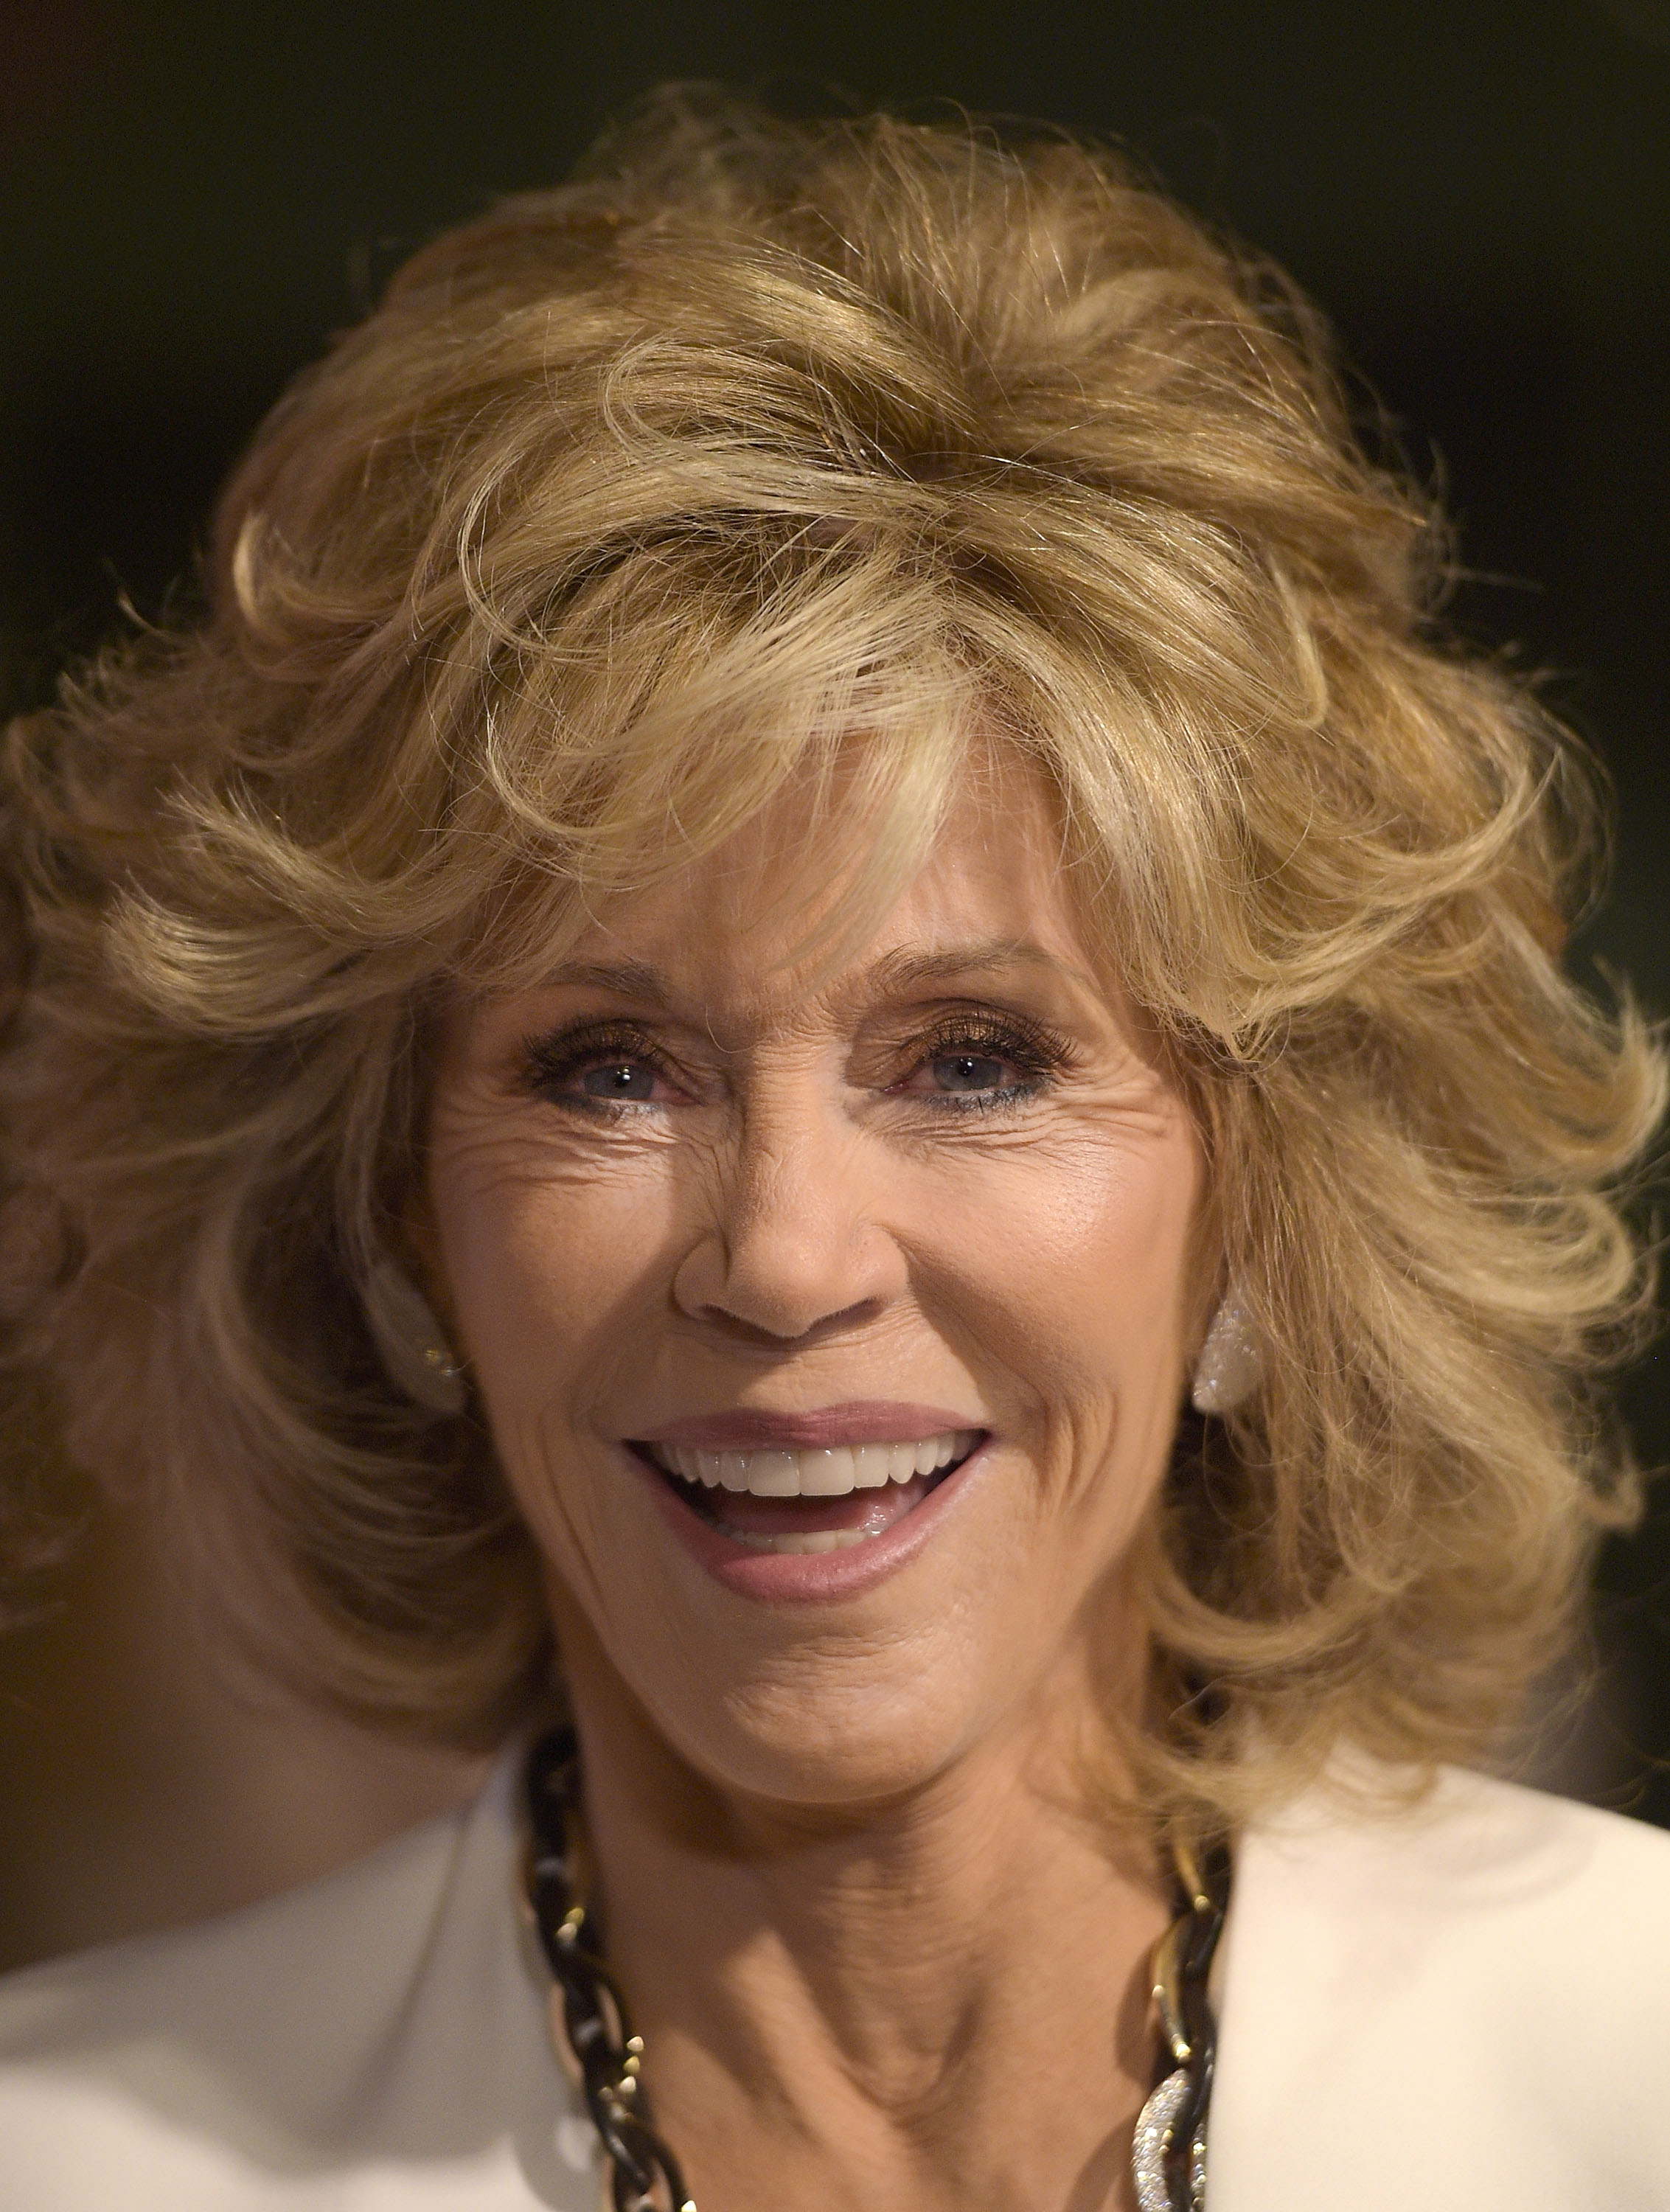 Jane Fonda attends Netflix's "Grace & Frankie" Q&A Screening Event at Pacific Design Center on May 26, 2015 in West Hollywood, California.